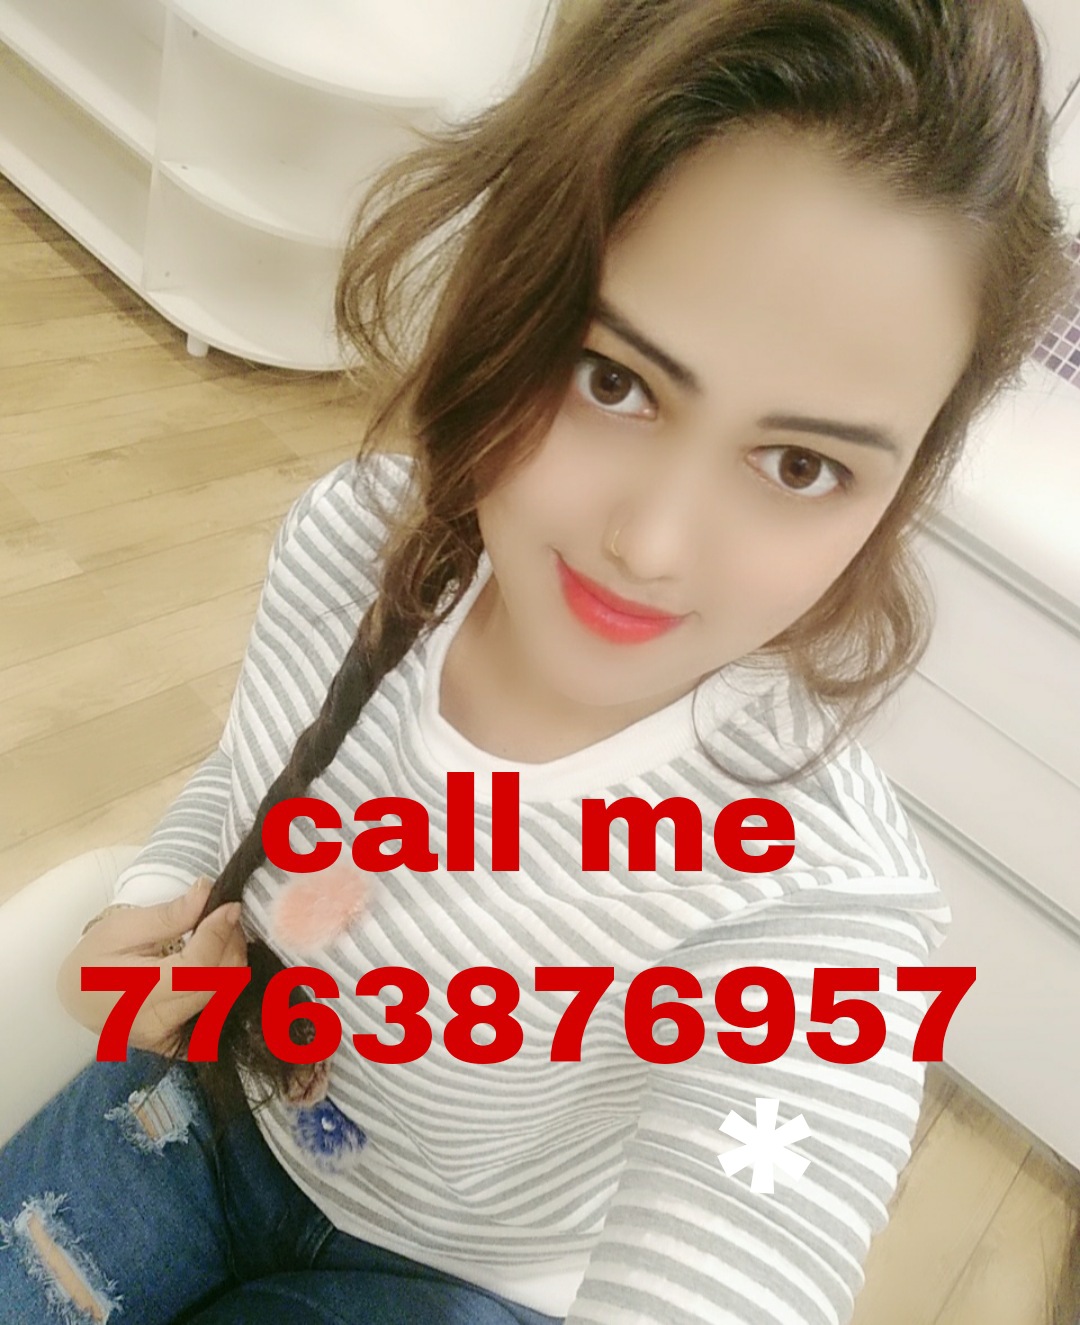 AMBIKAPUR CALL GIRL LOW PRICE CASH PAYMENT SERVICE AVAILABLE 